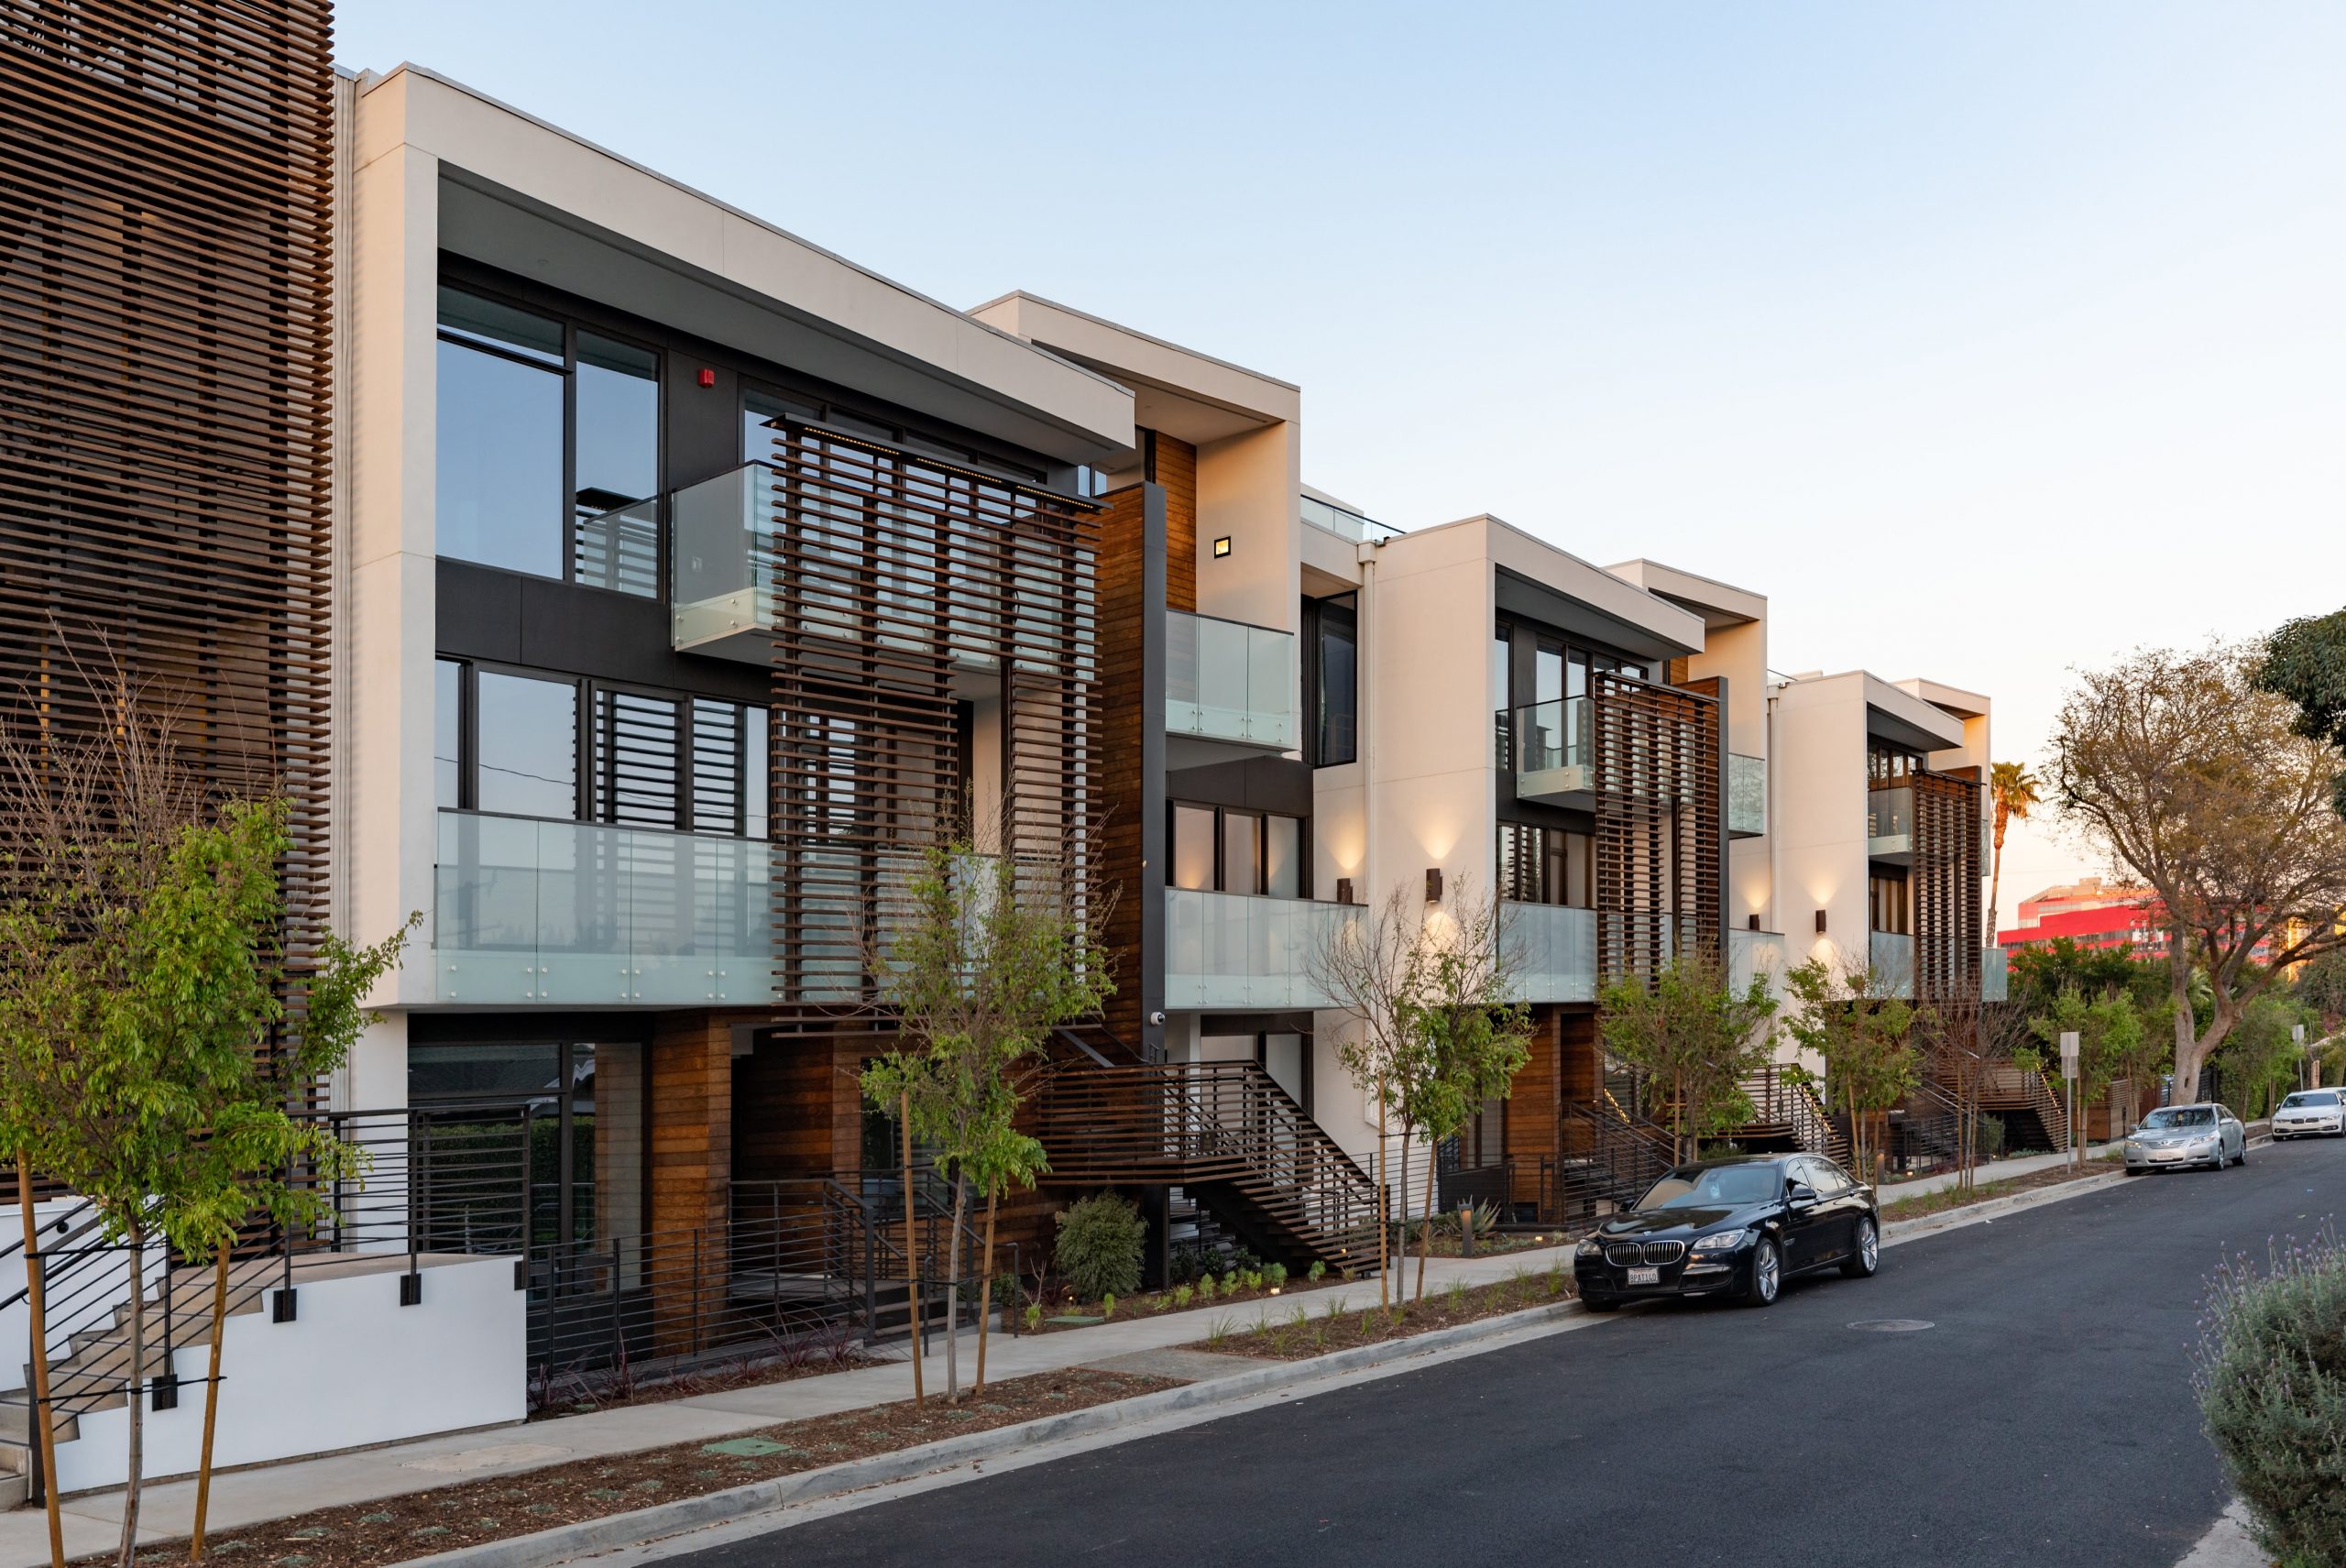 Modern luxury front street condominiums with wood details.